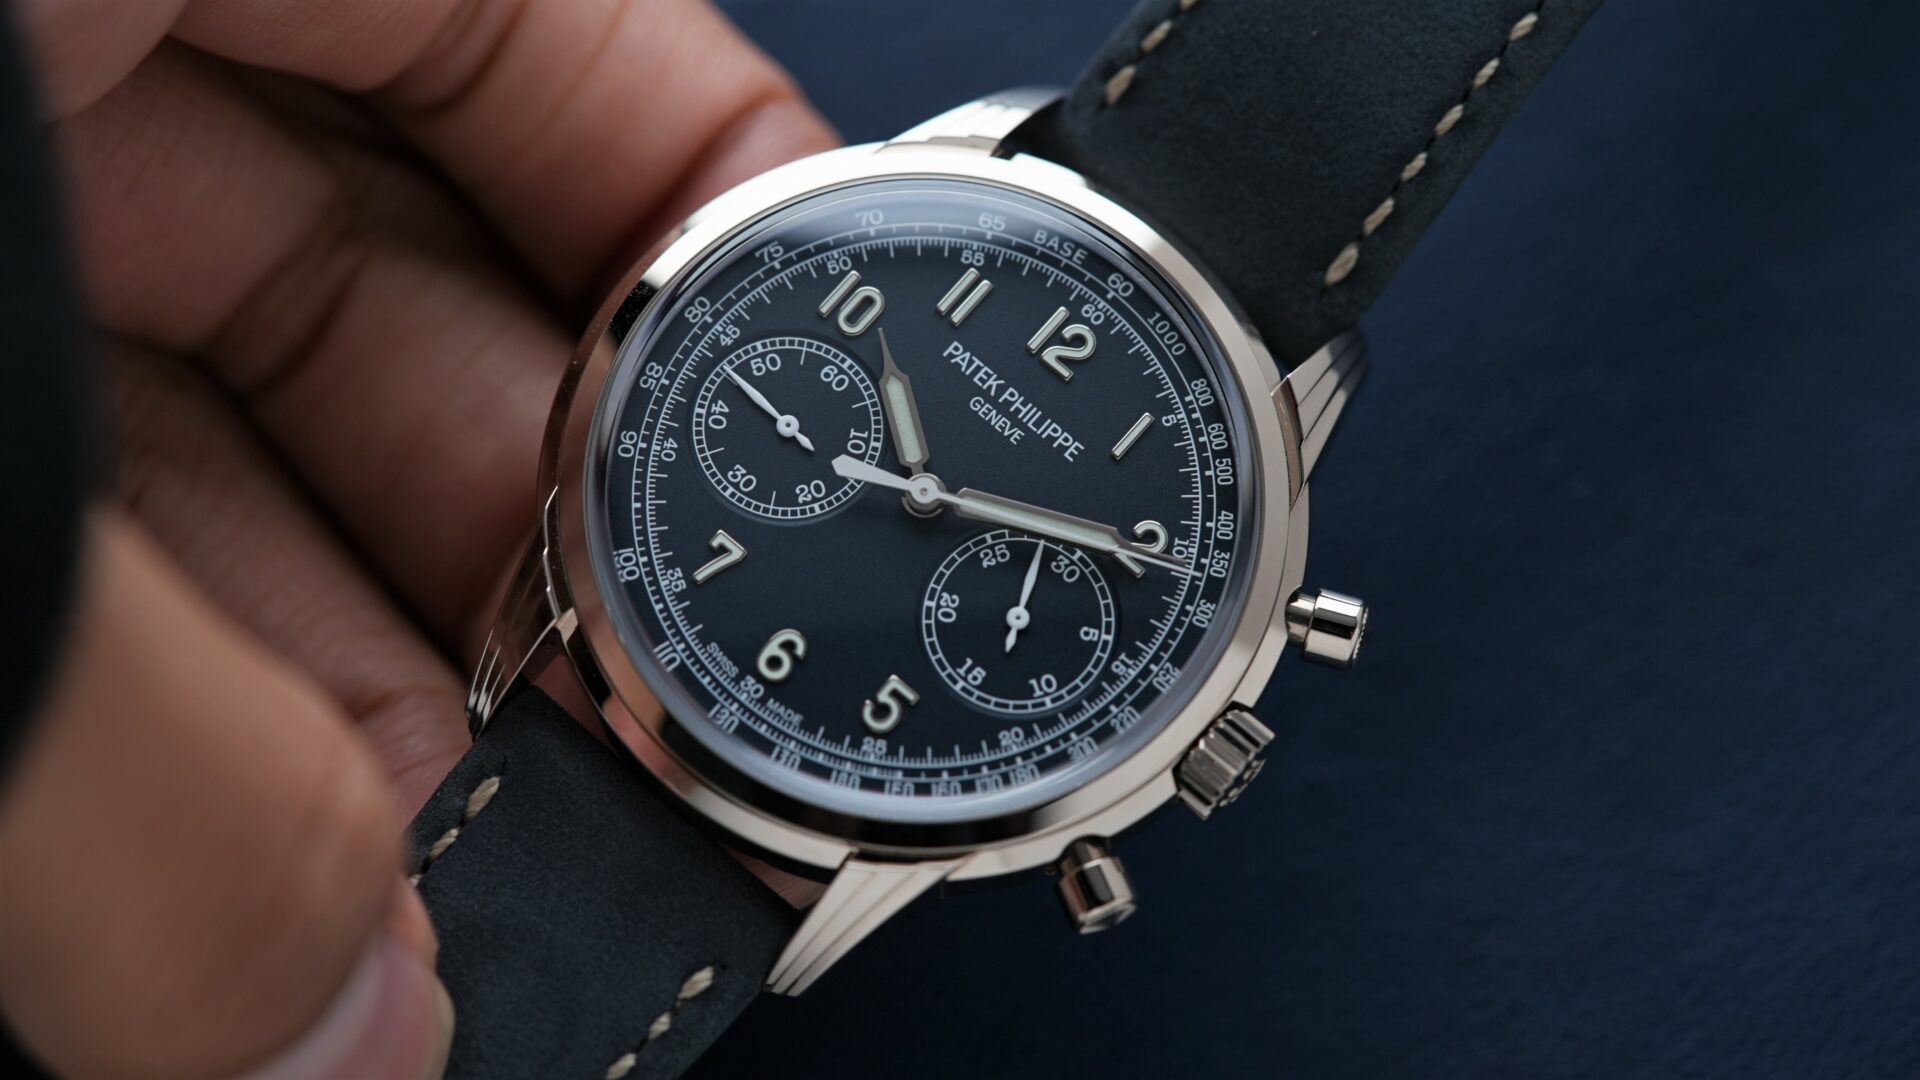 Patek Philippe Chronograph 5172 Complications Chronograph Recently Serviced Seal 5172G-001 White Gold watch being held in hand.